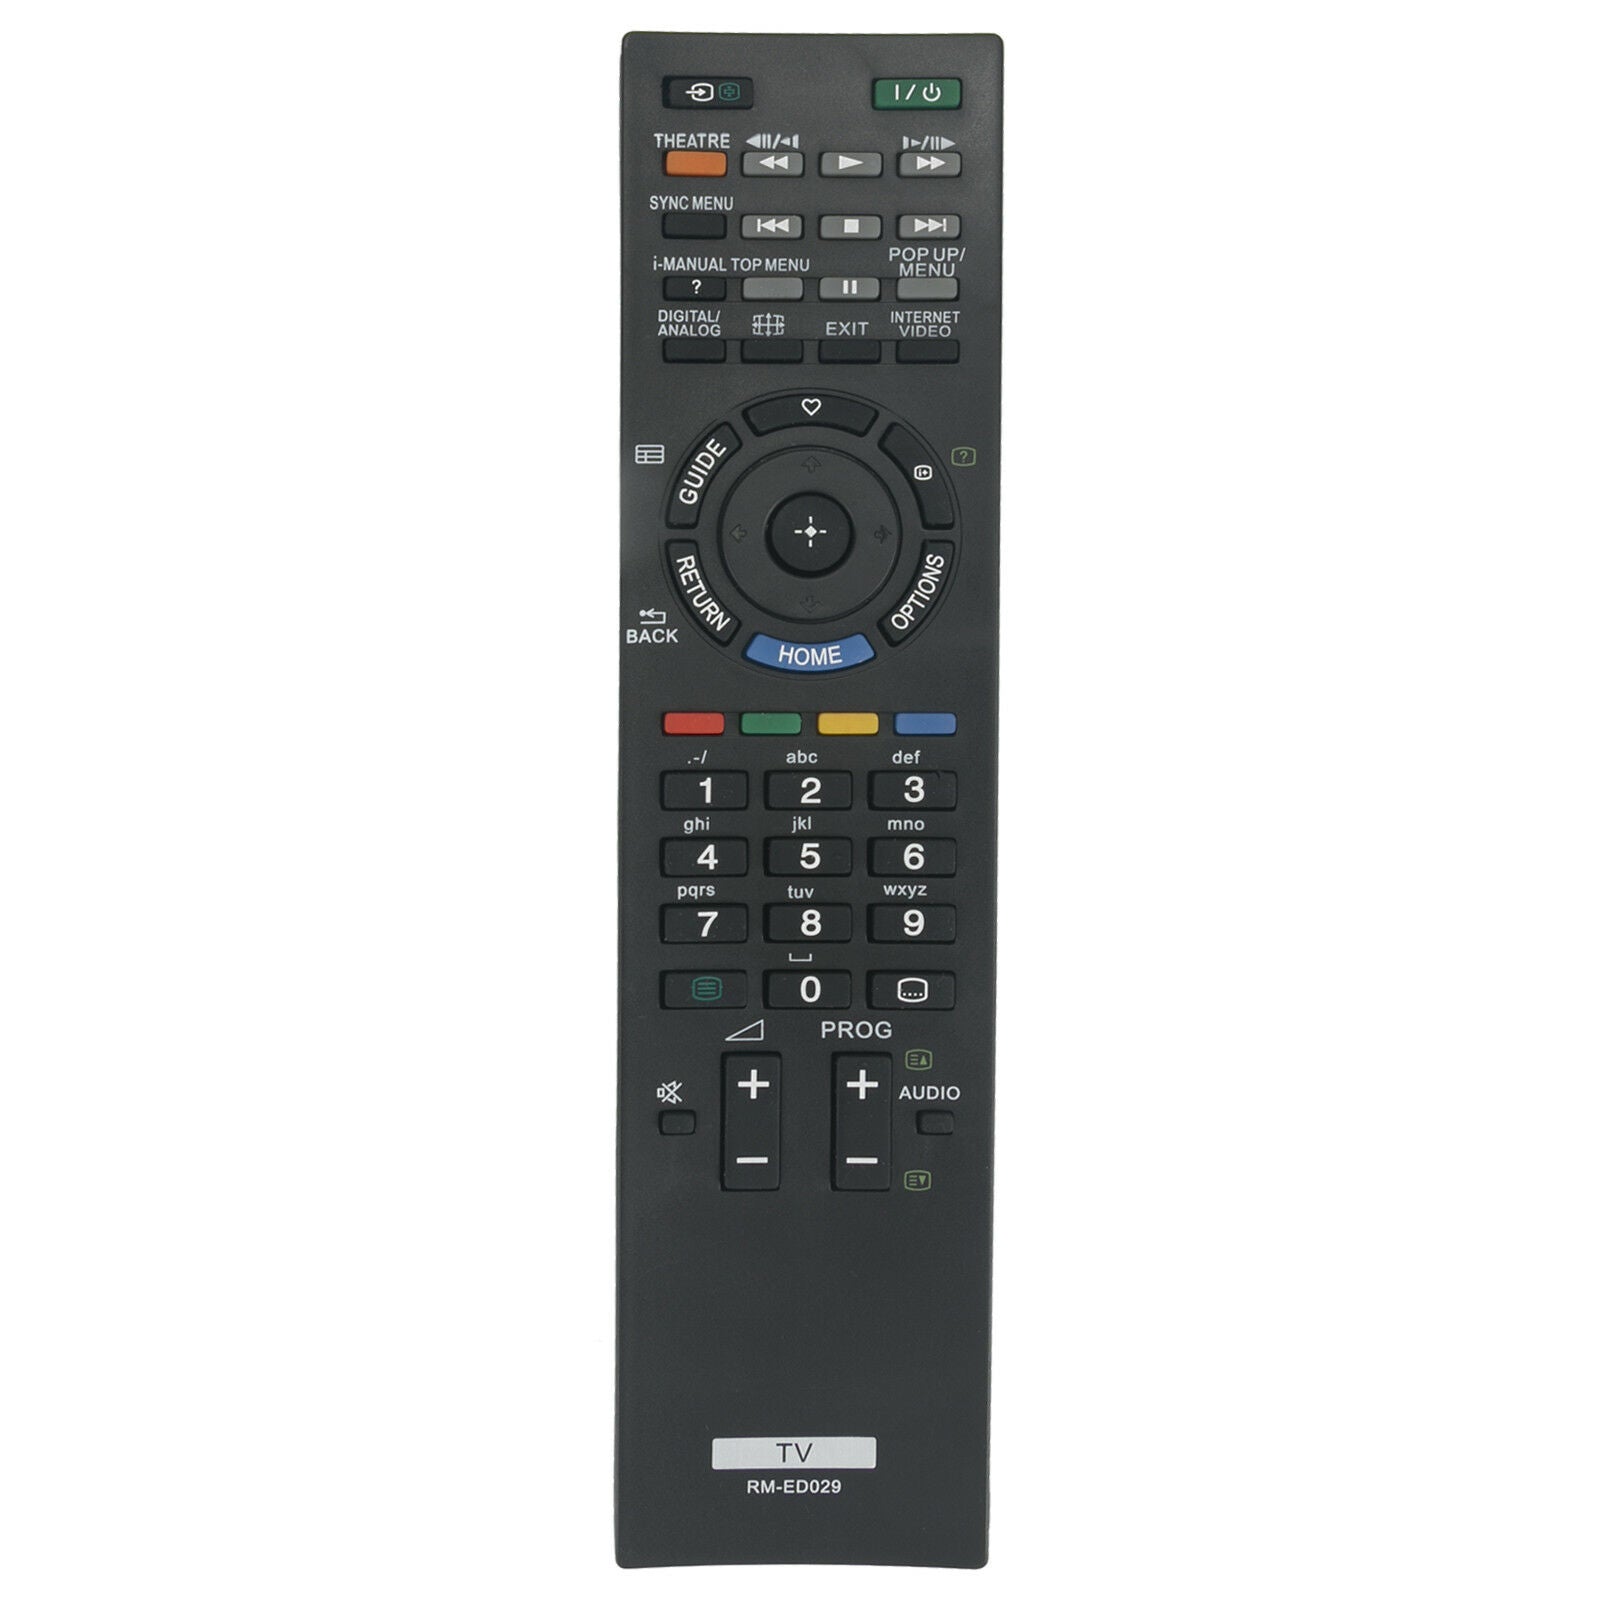 RM-ED029 Replacement Remote Control for Sony Bravia TV Replace RM-ED035 RM-ED044